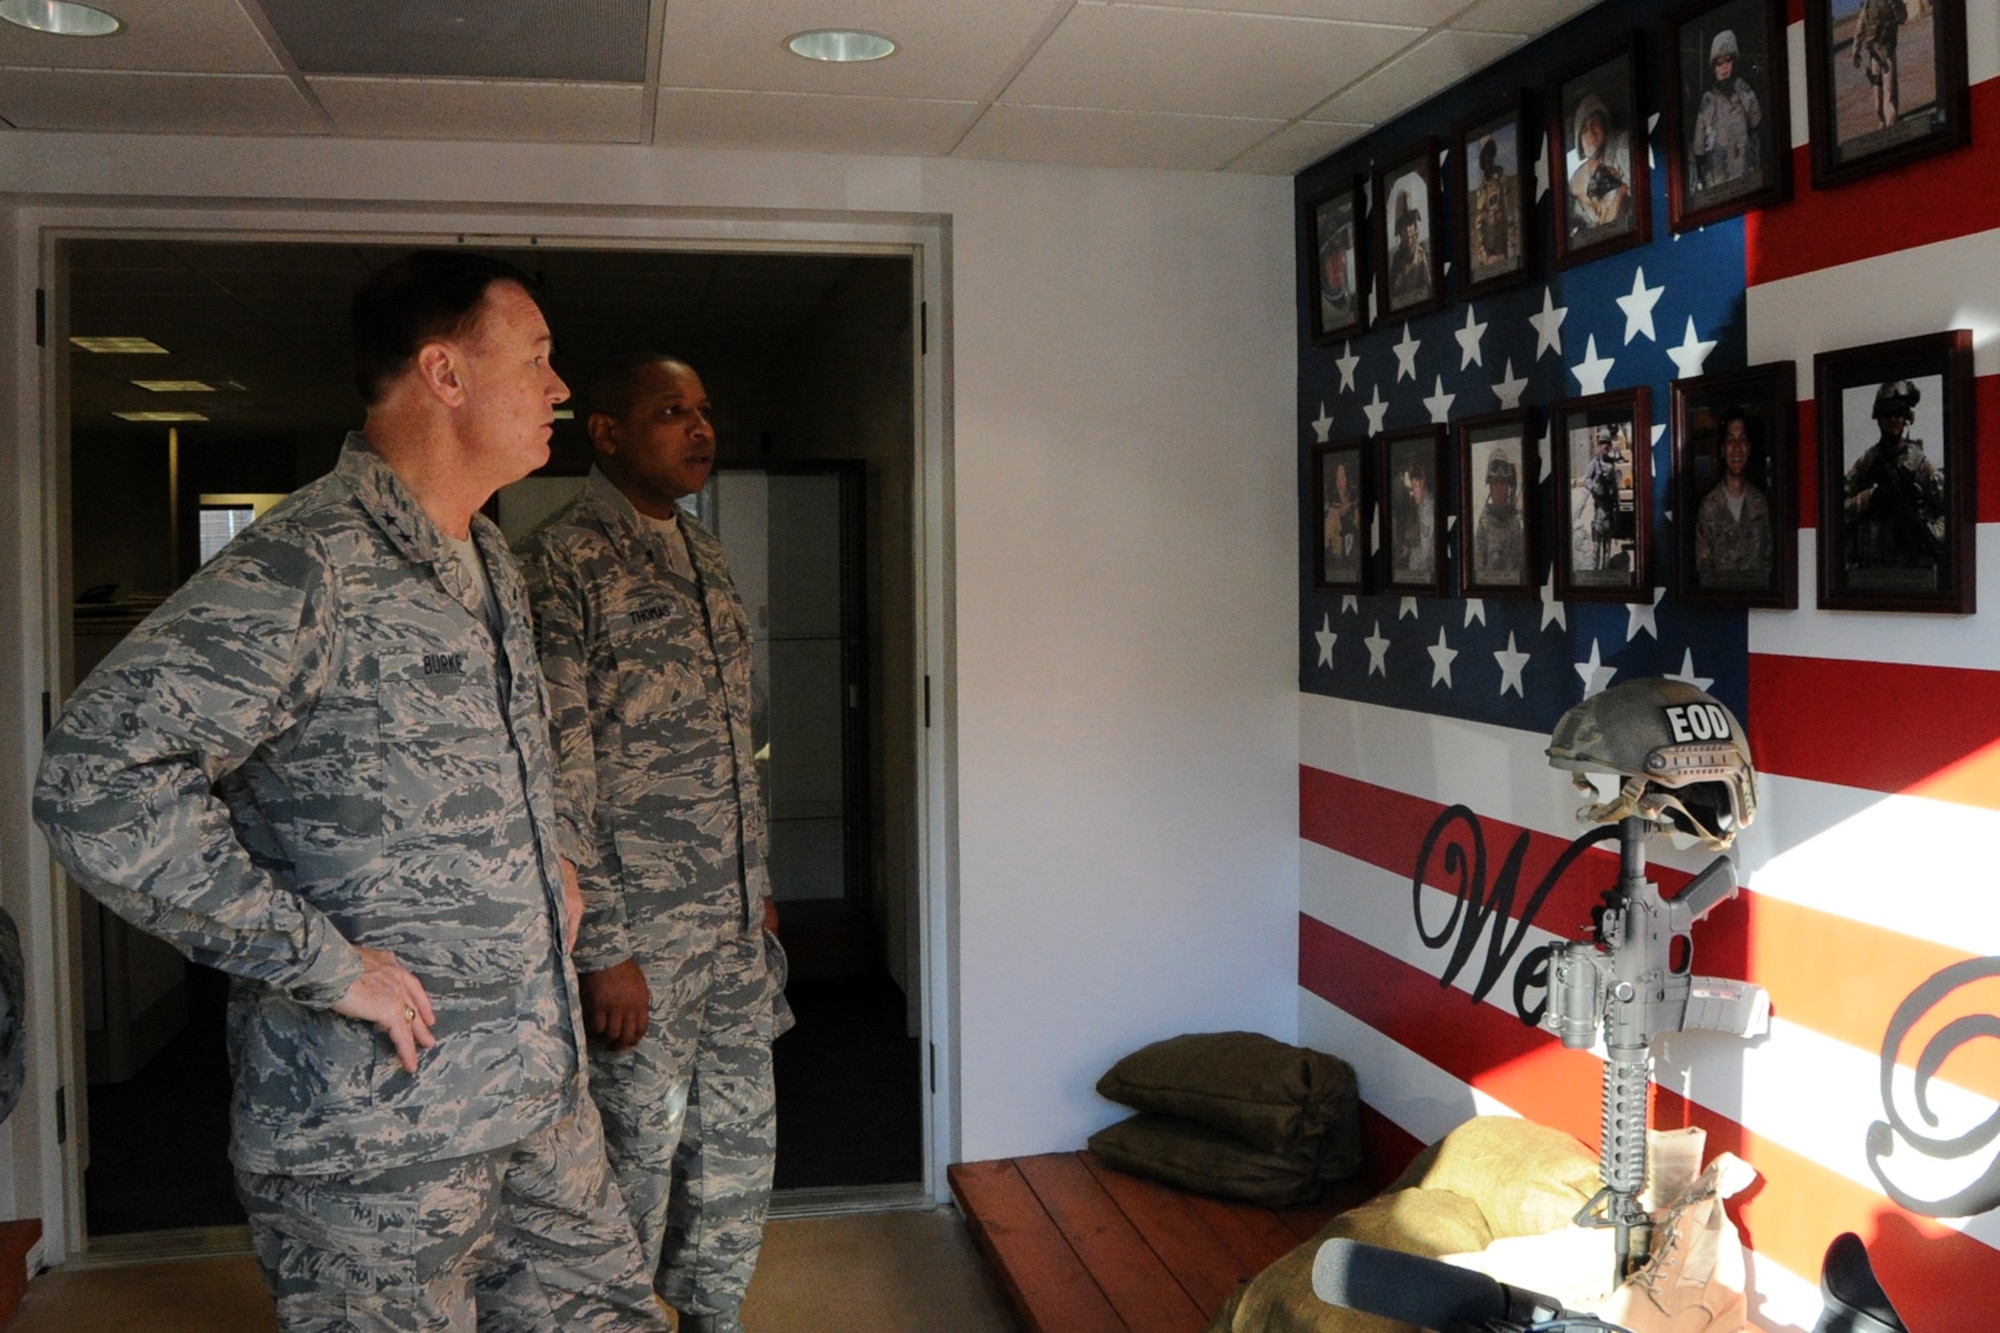 Air Force District of Washington Commander Maj. Gen. Darryl W. Burke and AFDW Command Chief Master Sgt. Farrell Thomas view a wall dedicated to fallen Explosive Ordnance Disposal Airmen on Joint Base Andrews, Md., Oct. 23, 2015. Burke communicates his appreciation for the EOD Airmen’s sacrifice for the mission and recognized excellence within their career field. (U.S. Air Force photo/Staff Sgt. Matt Davis)